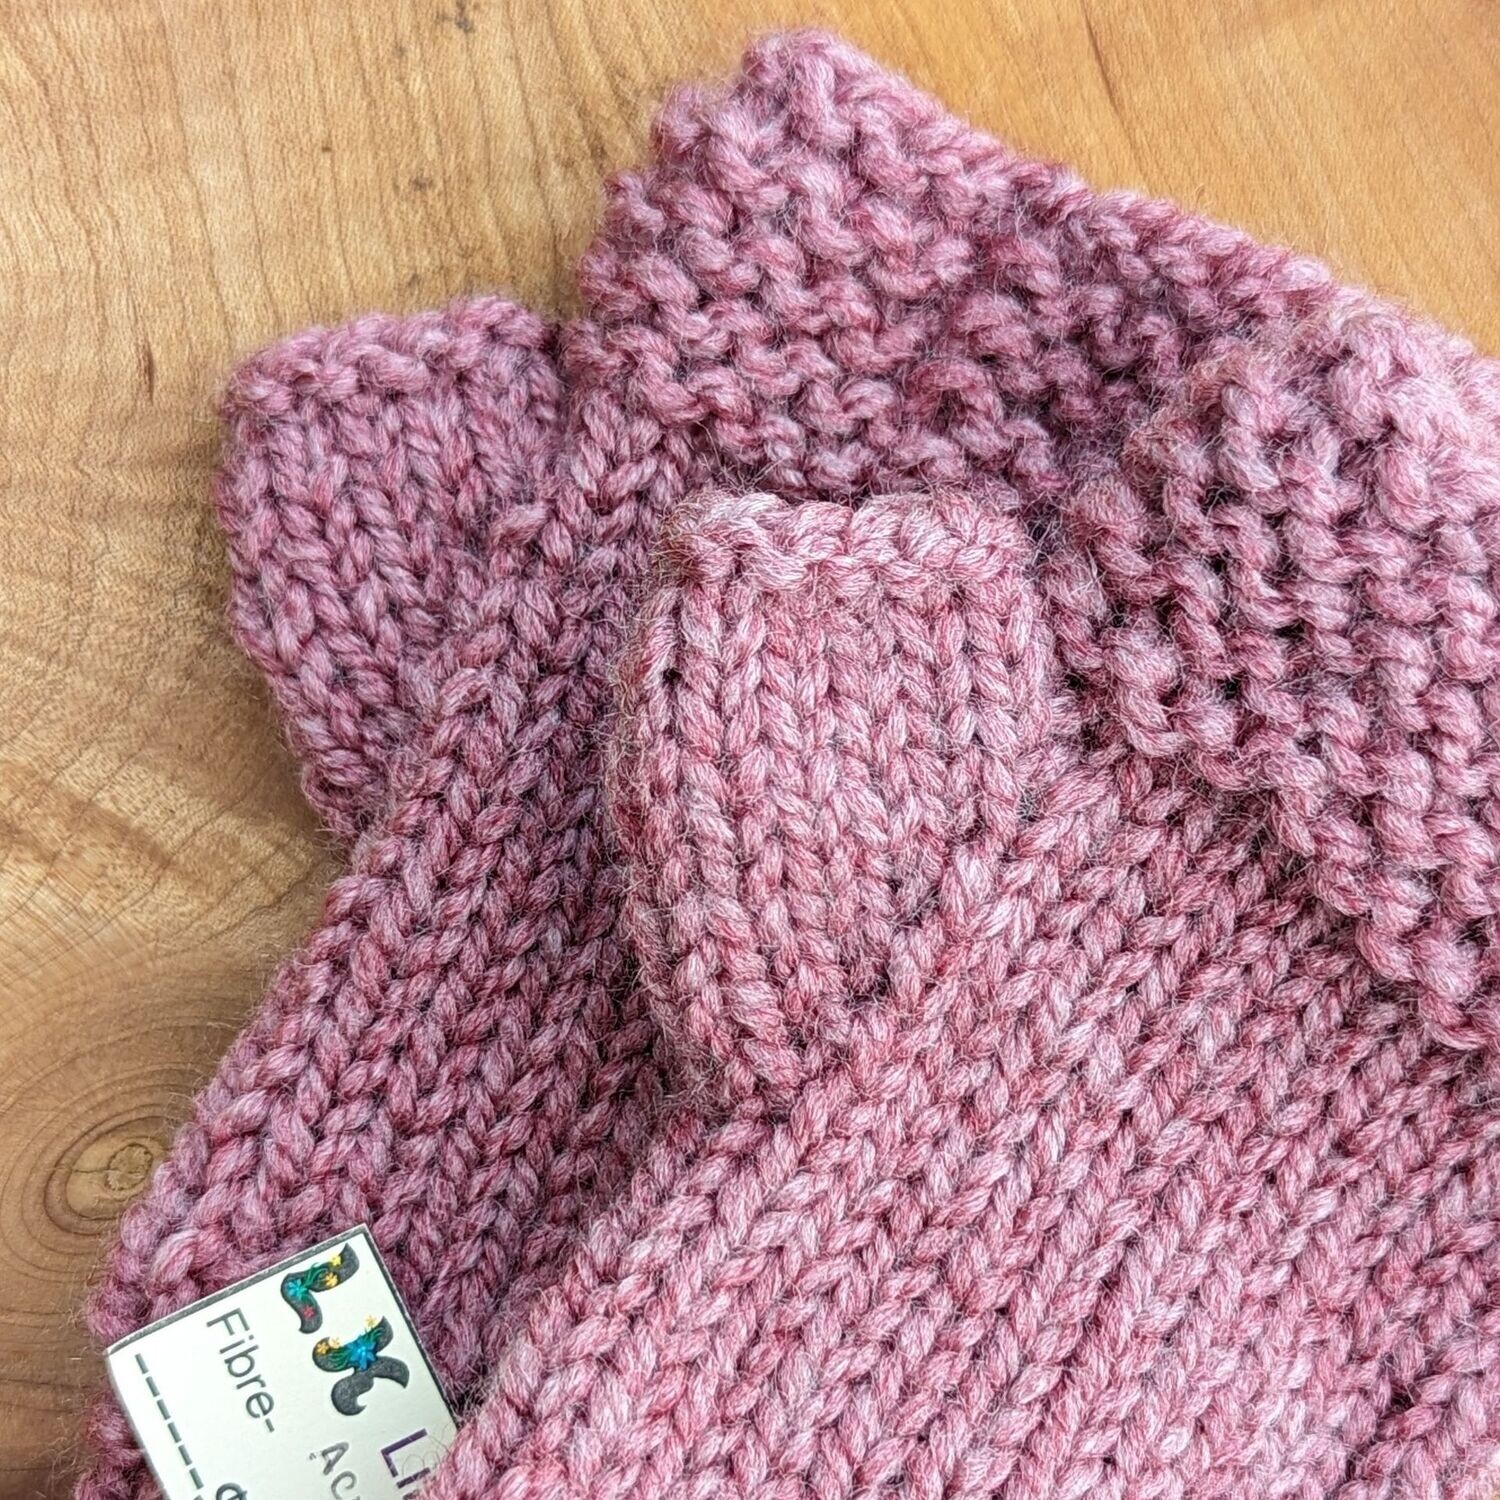 Lilac Knit Hand Warmers